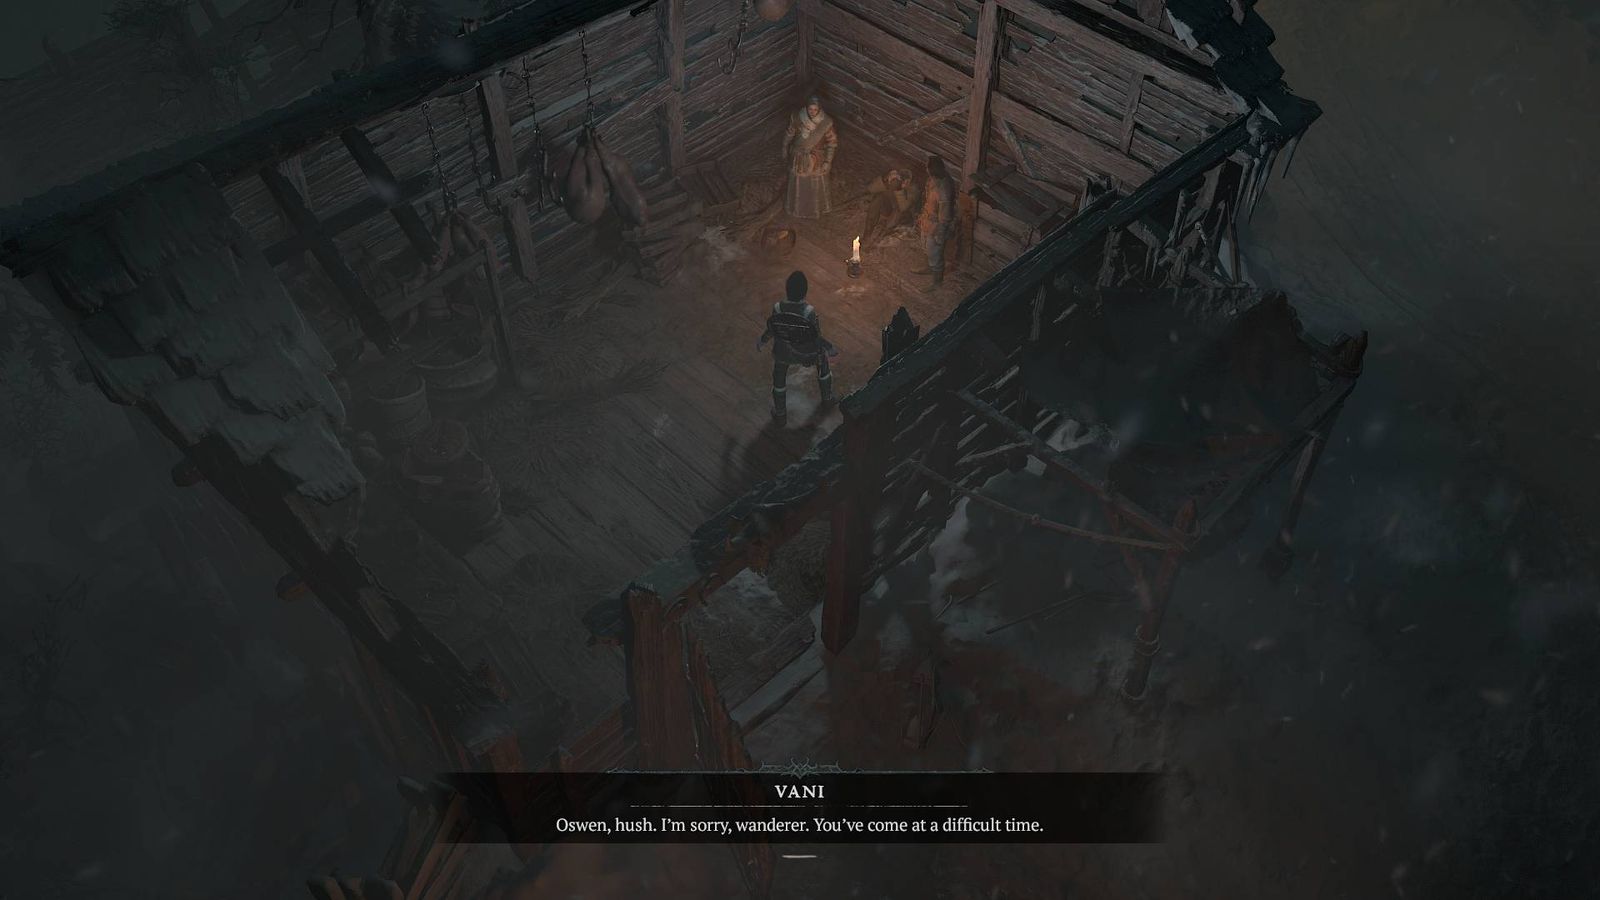 Gameplay image showing an old wooden hut in Diablo 4.